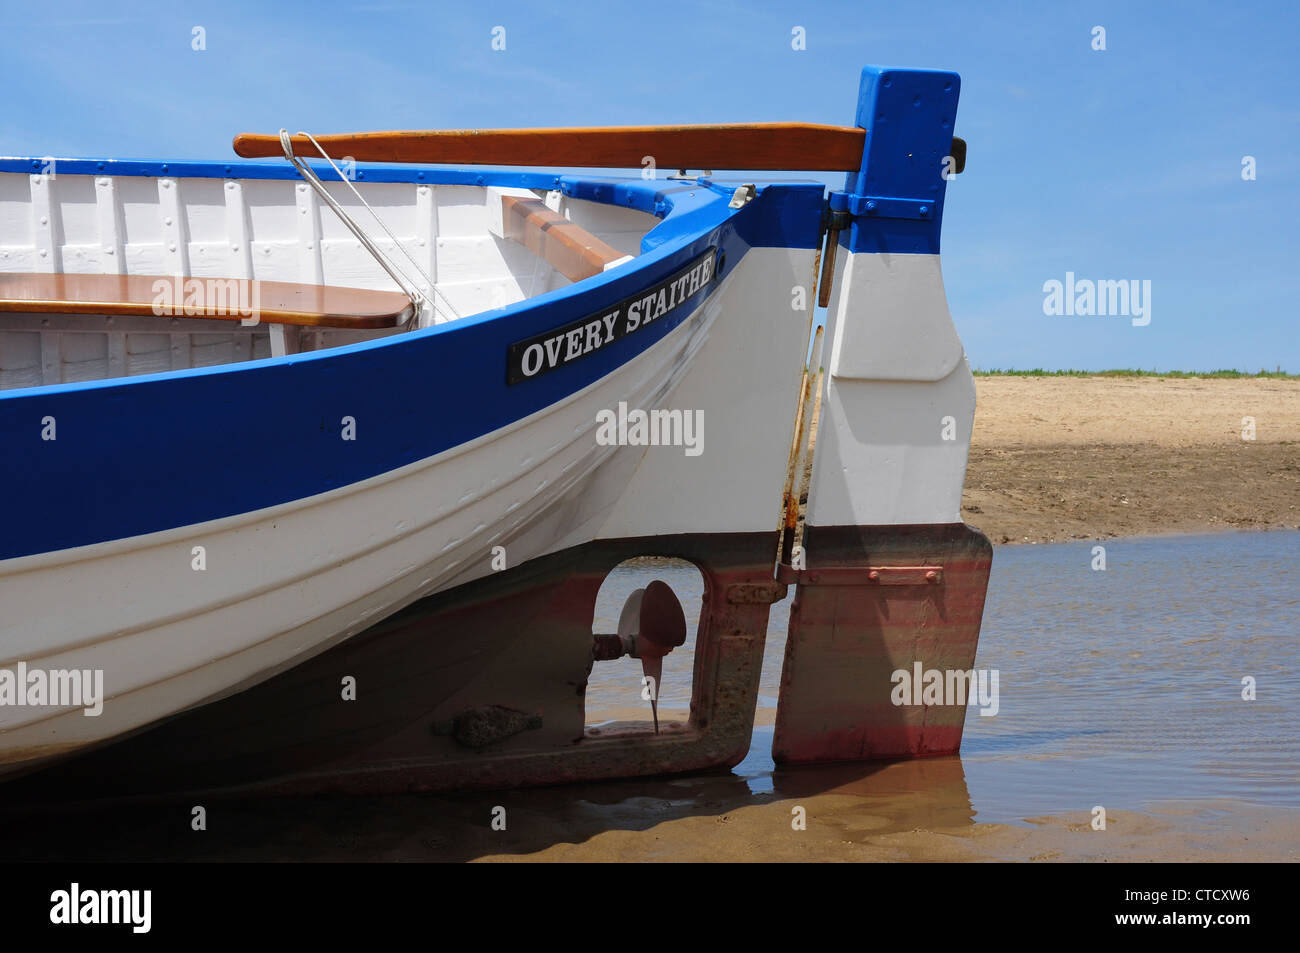 Boat Stern Stock Photos &amp; Boat Stern Stock Images - Alamy